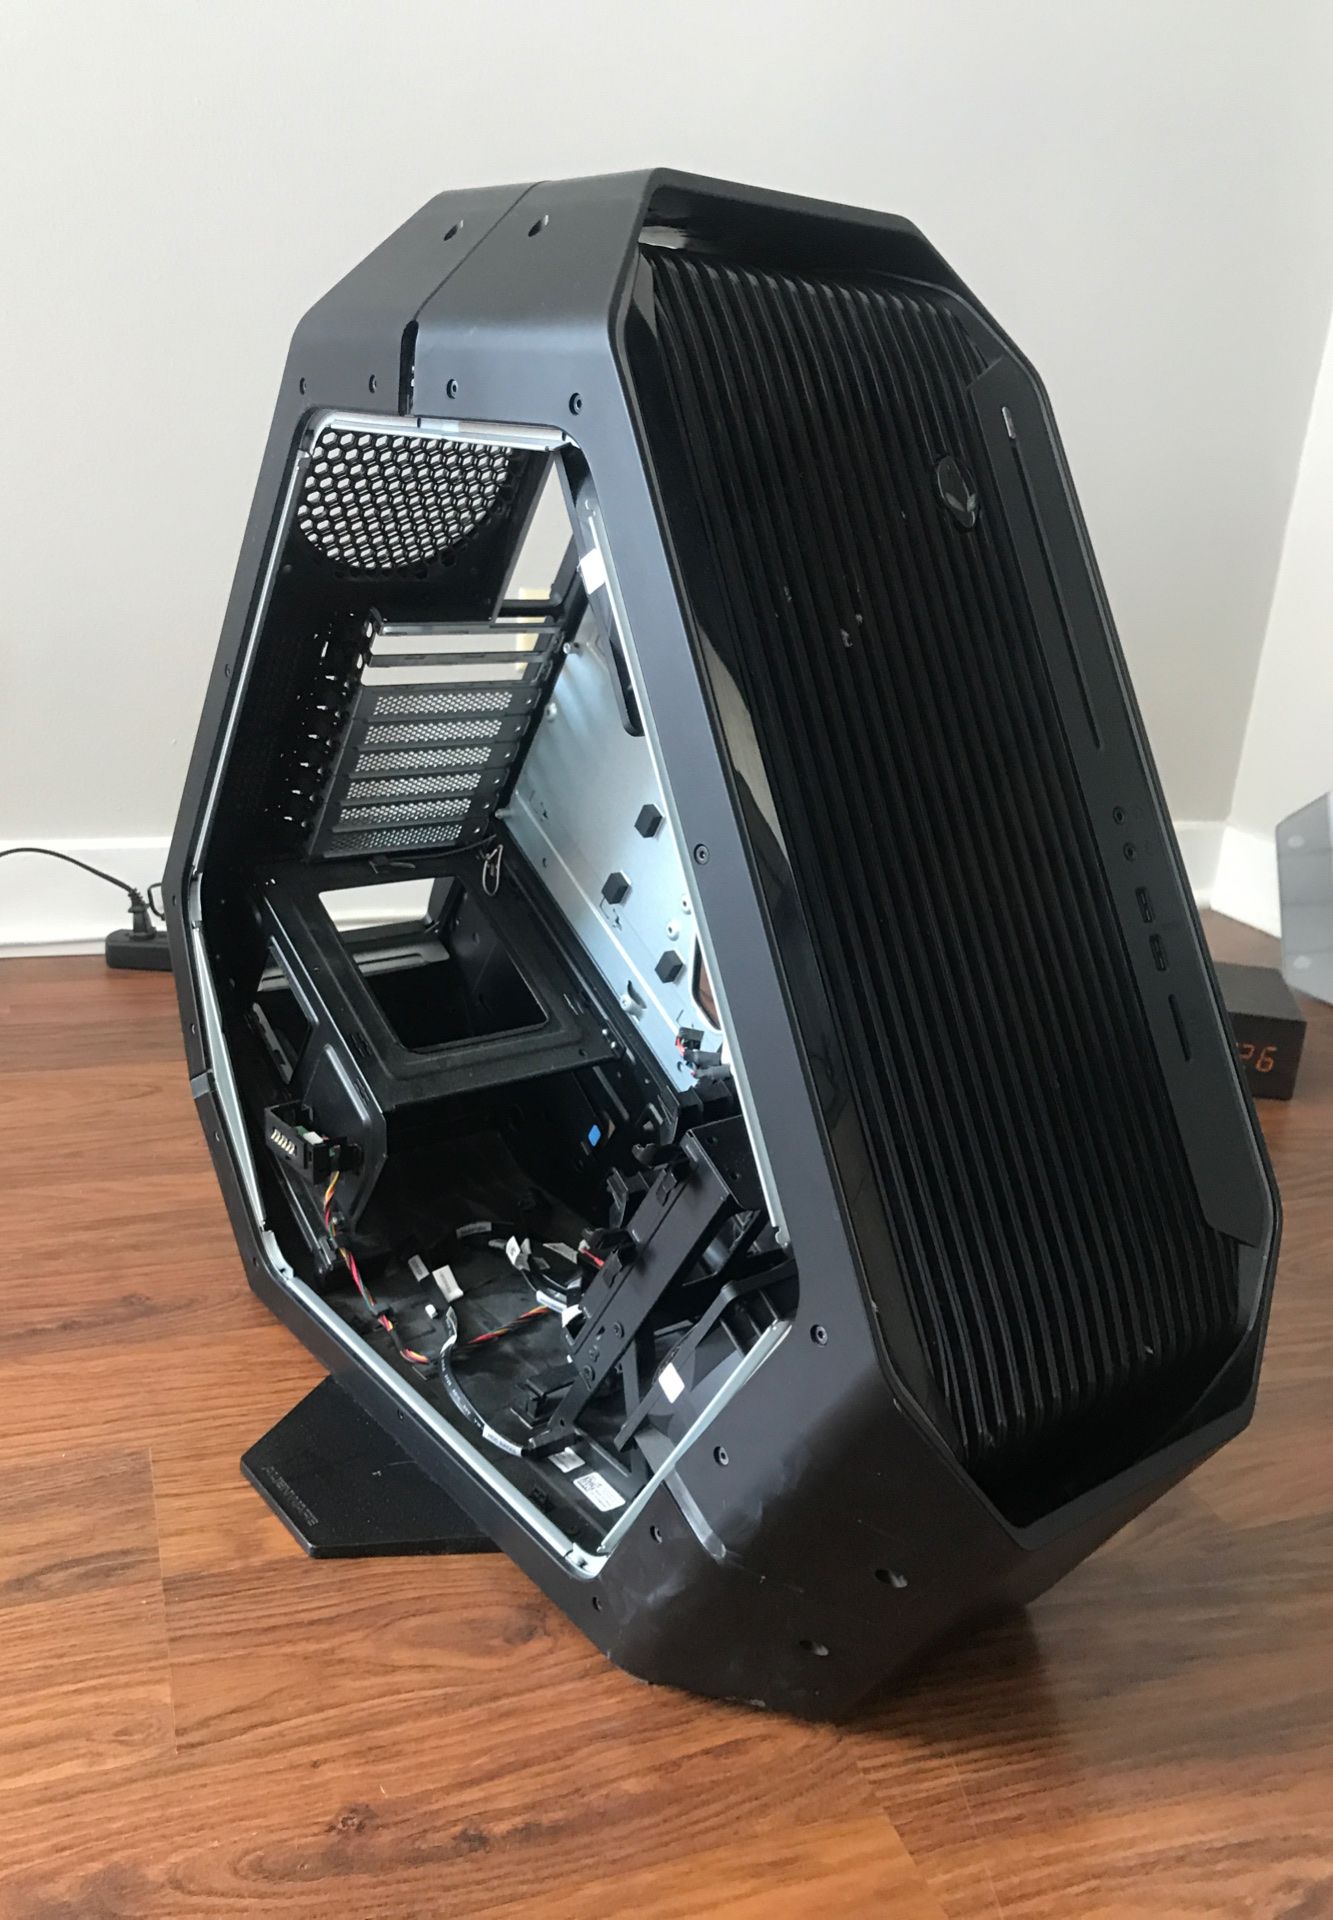 PC Gaming Case - HAS TO GO TODAY